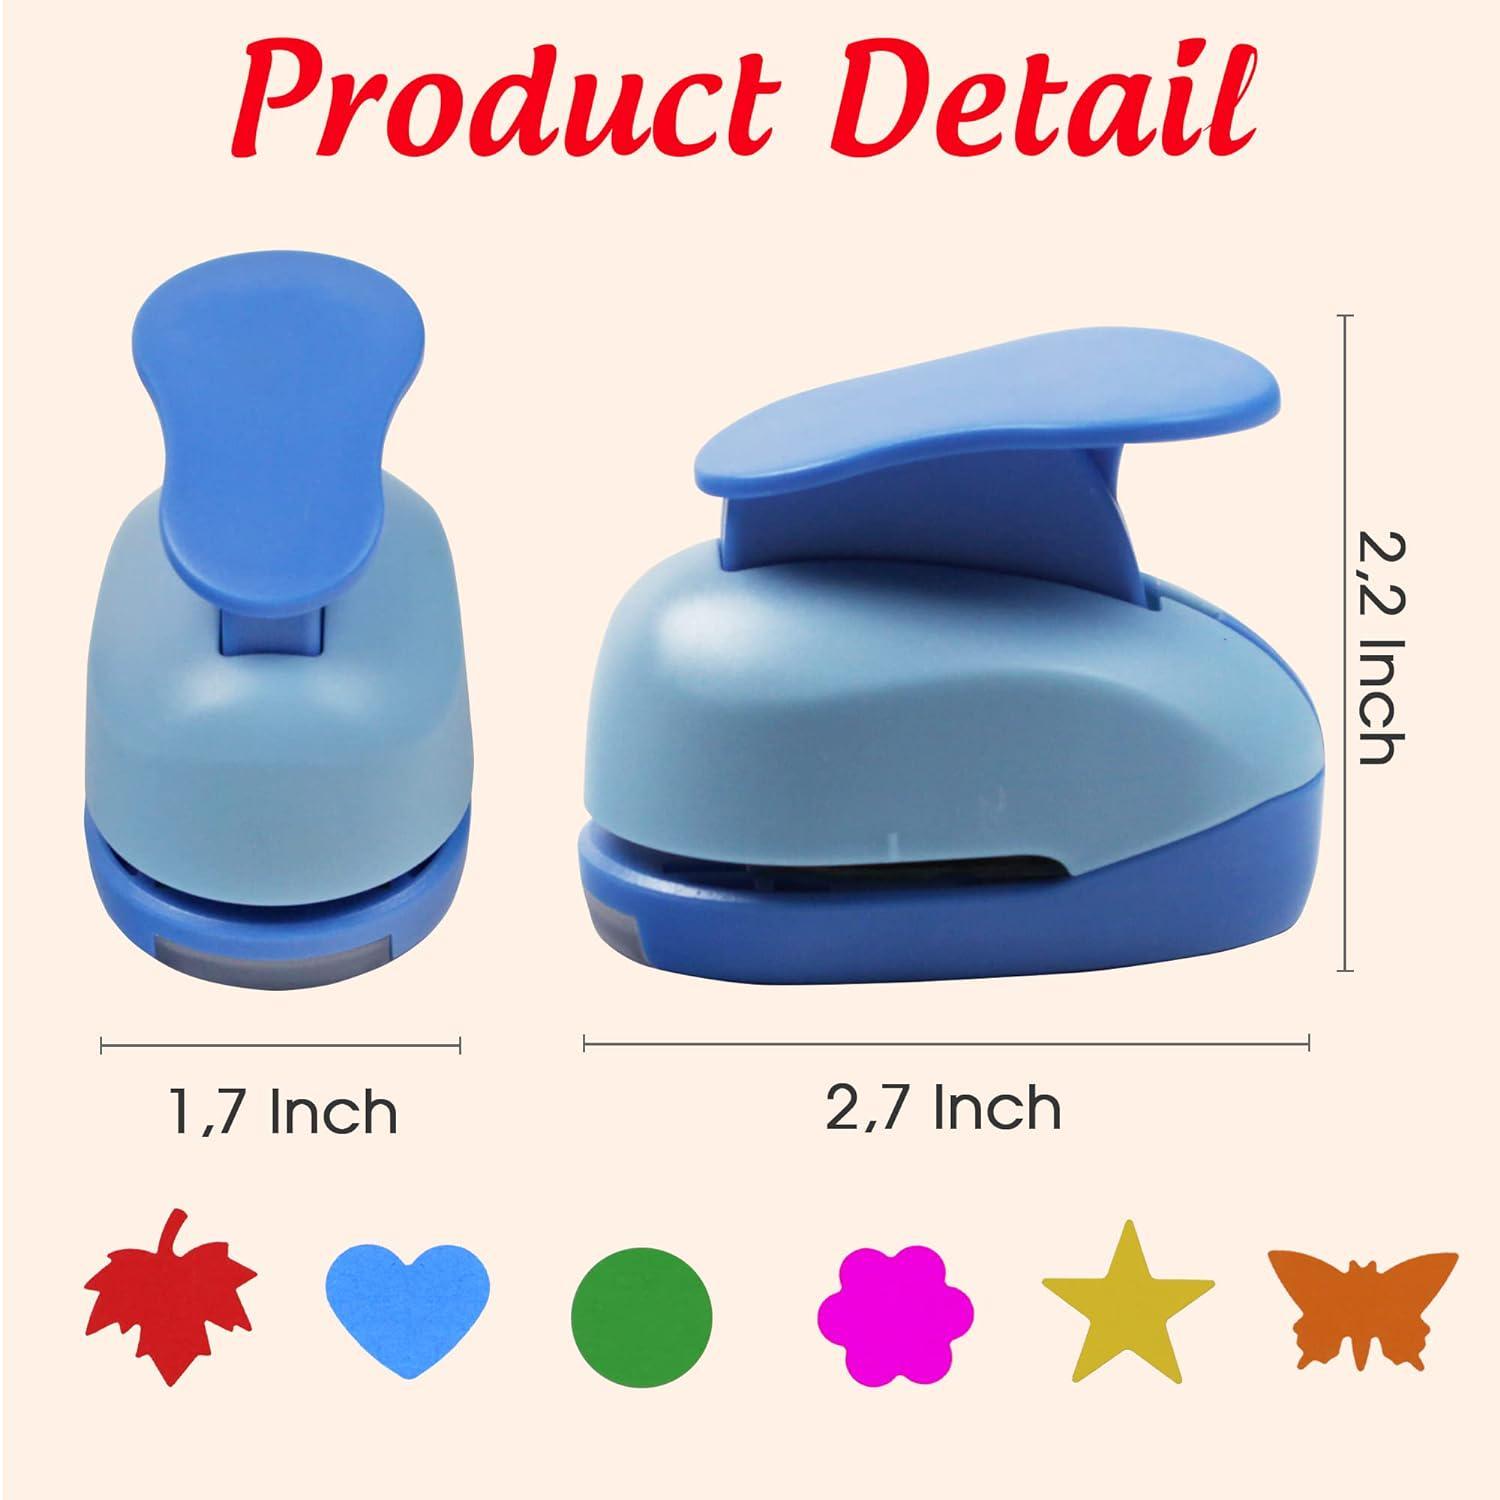 ECOHU Star Hole Punch for Paper Crafts, 1.5-inch Across, Small Hole Star Punch Cutter, Lever Punch, Star Shape for Card Makin